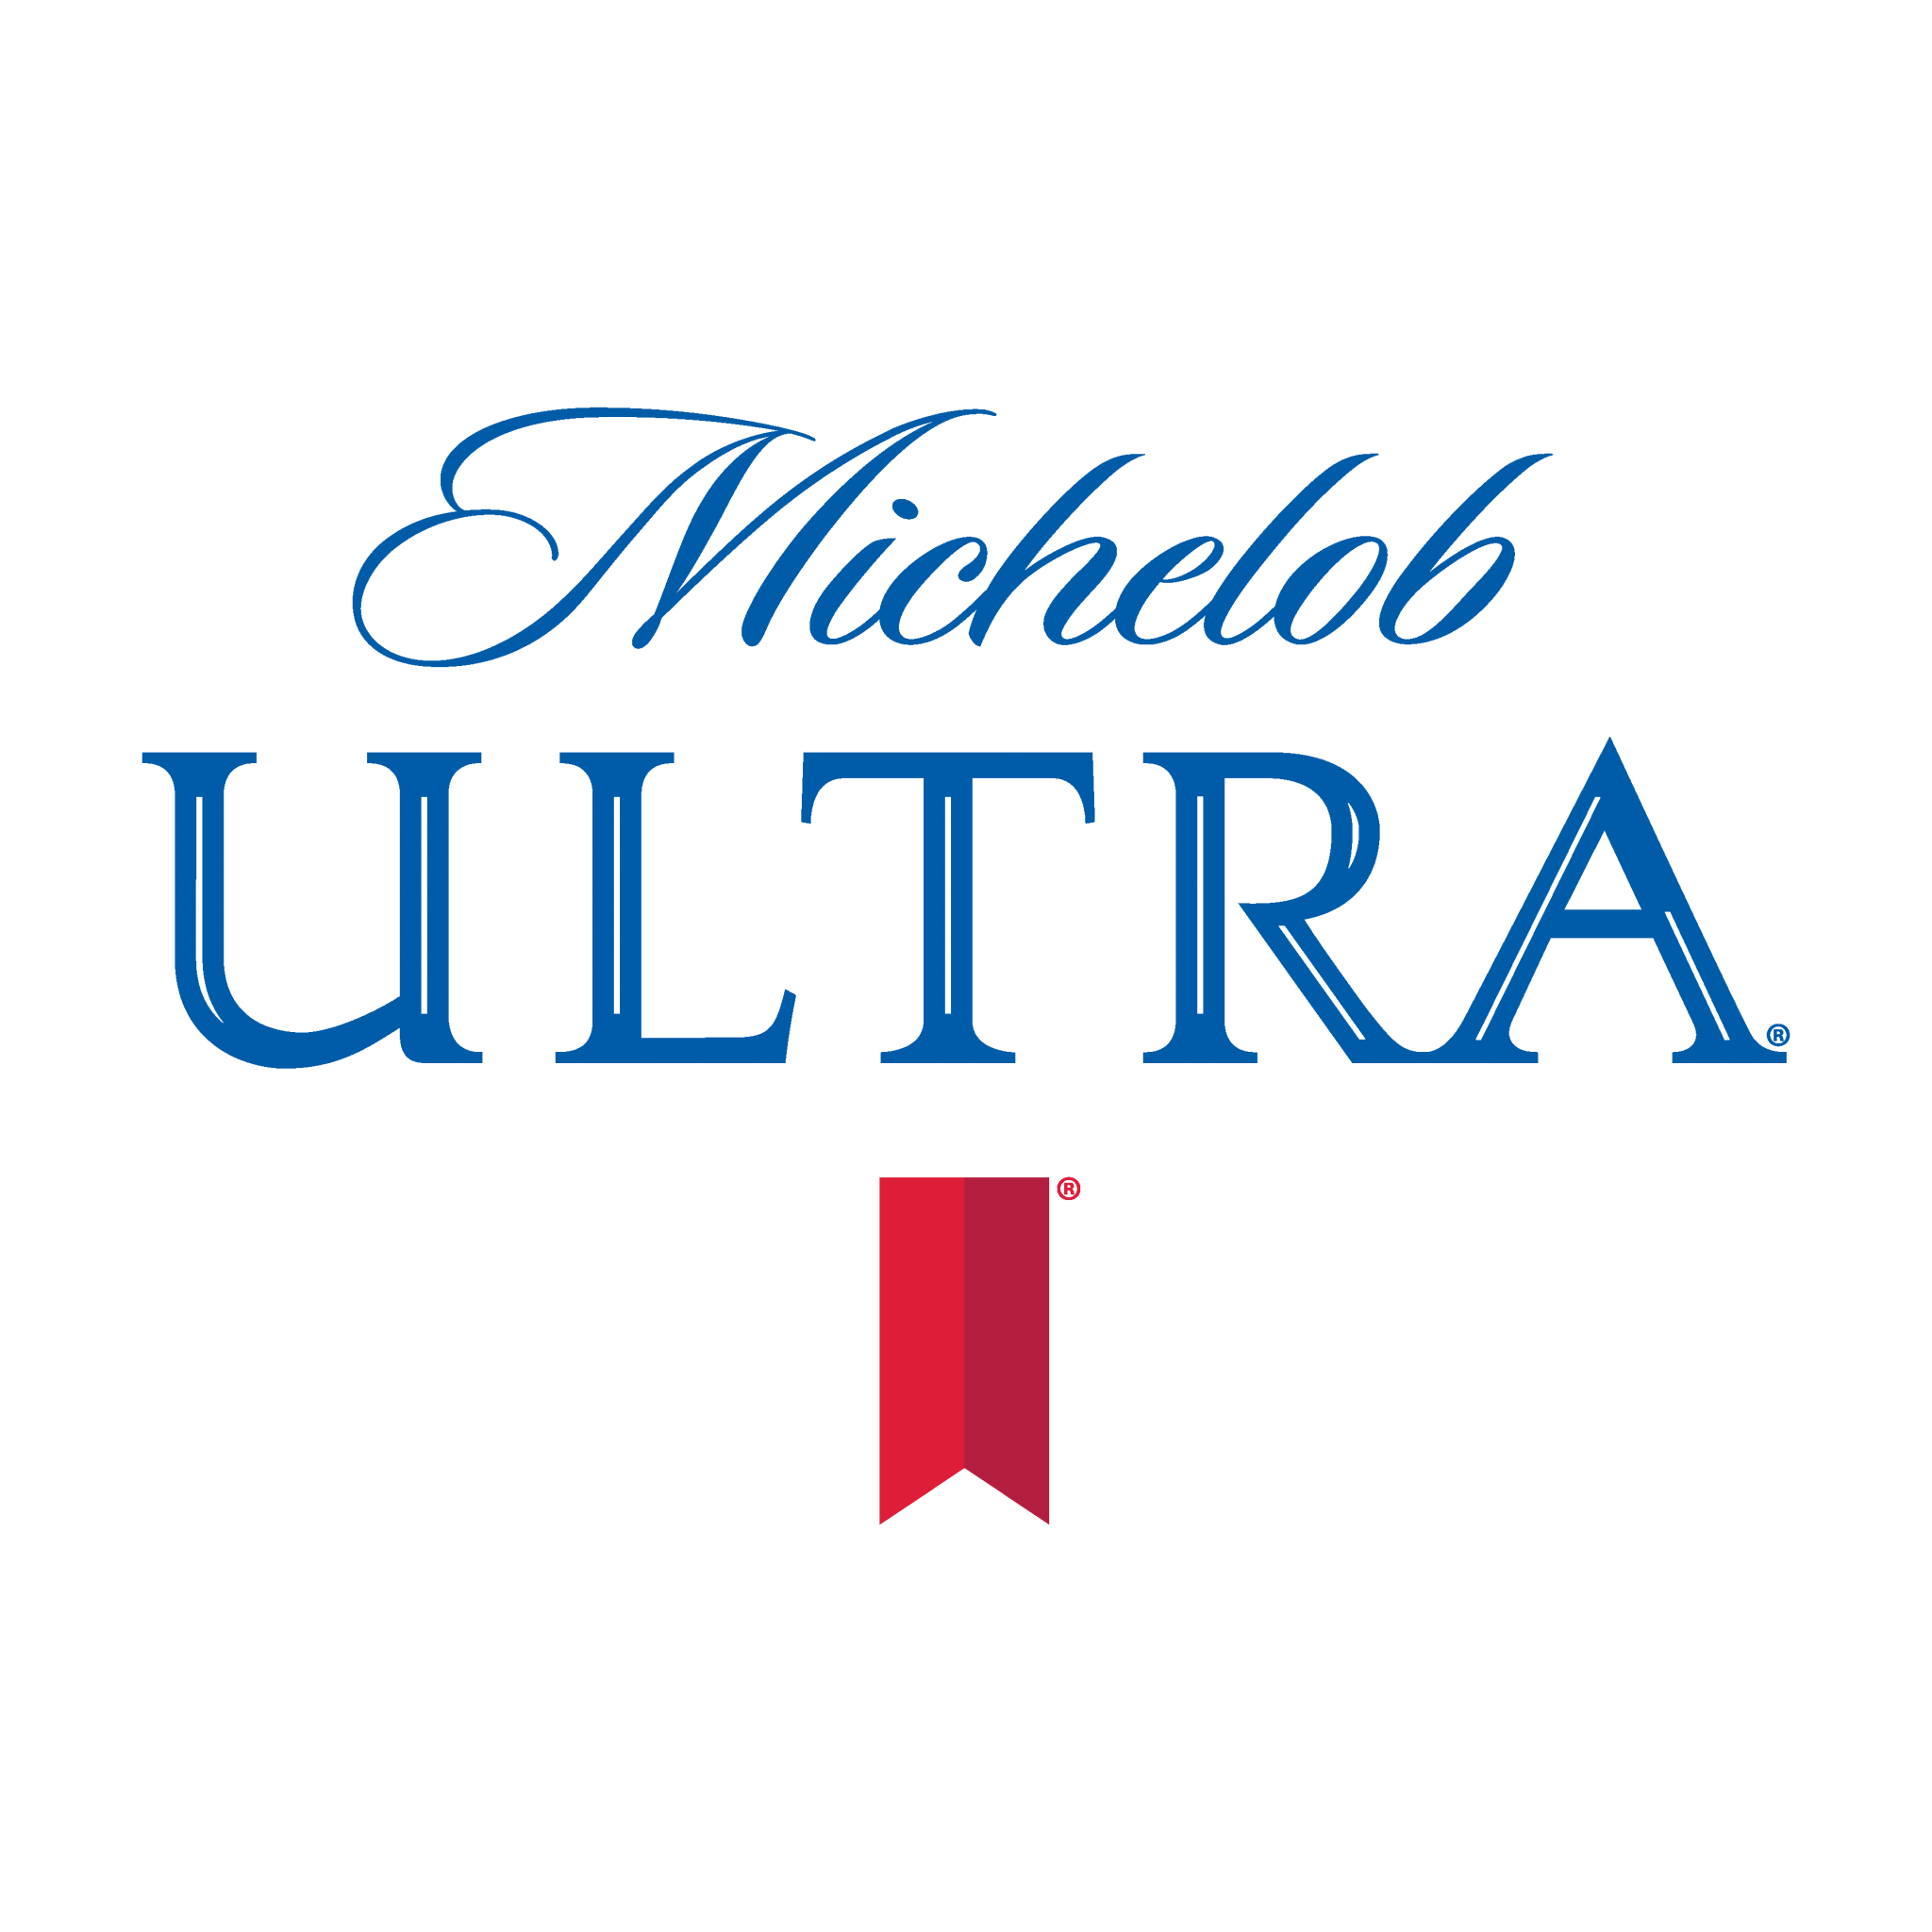 Sponsored by - Michelob ULTRA